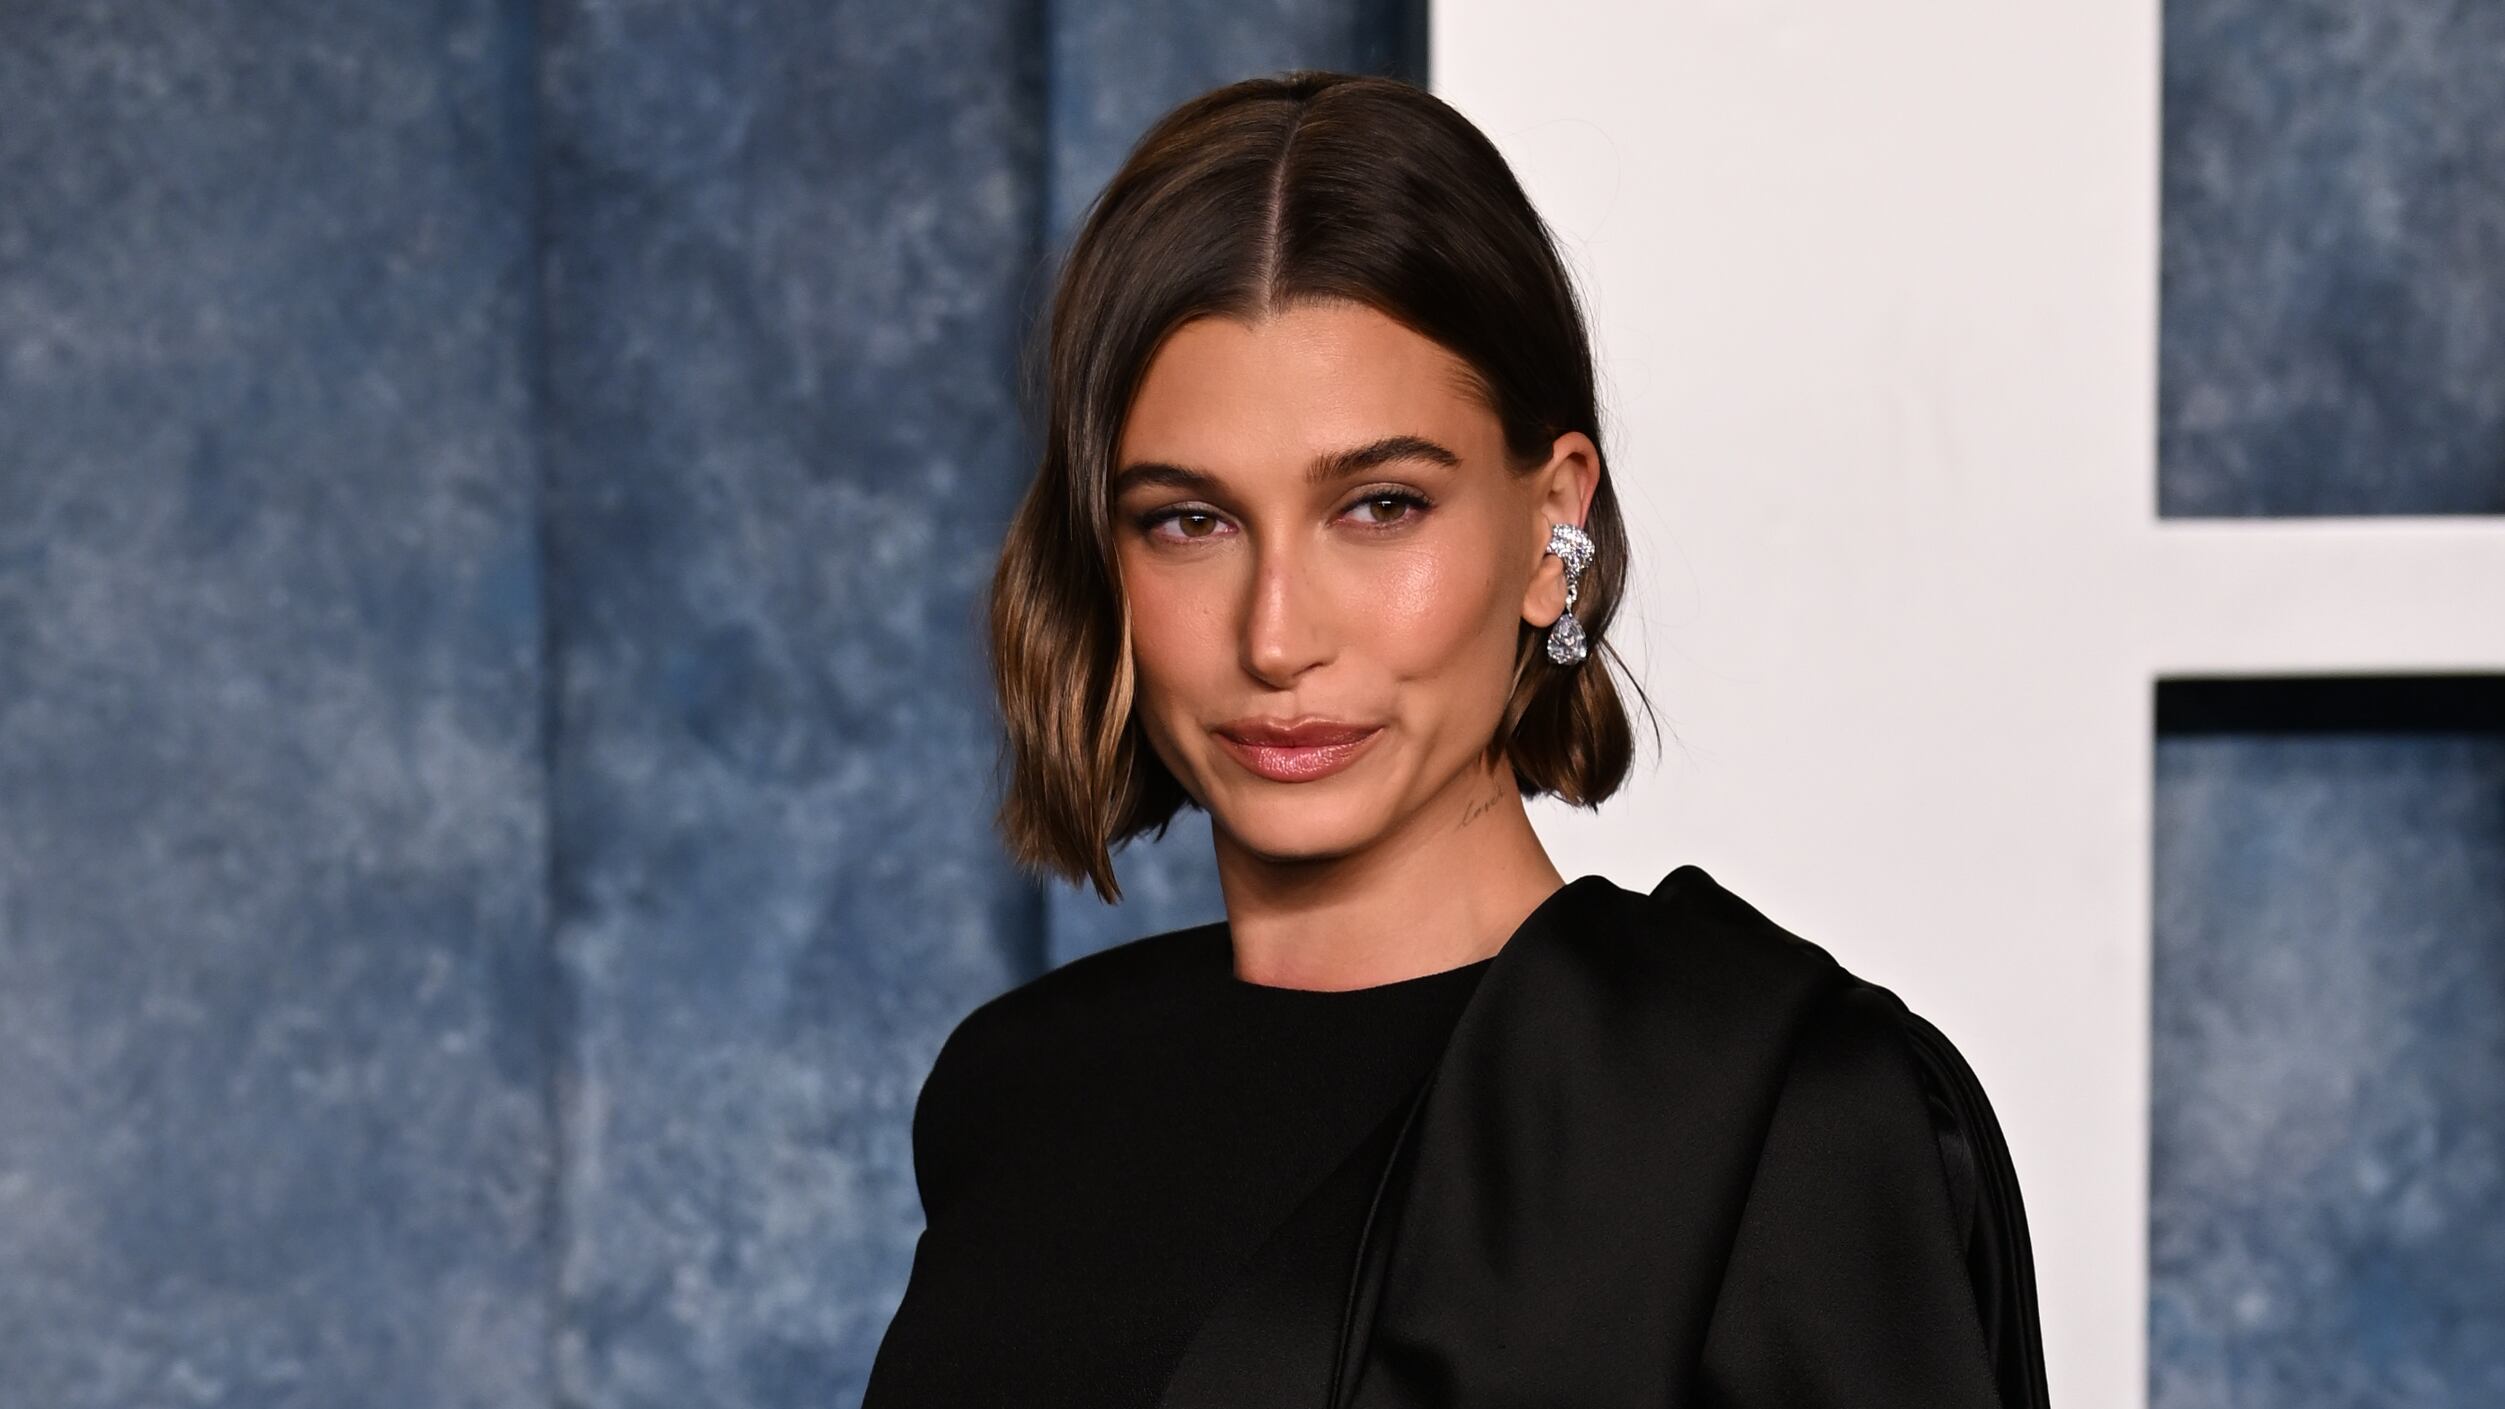 Hailey Bieber expecting first child with husband Justin